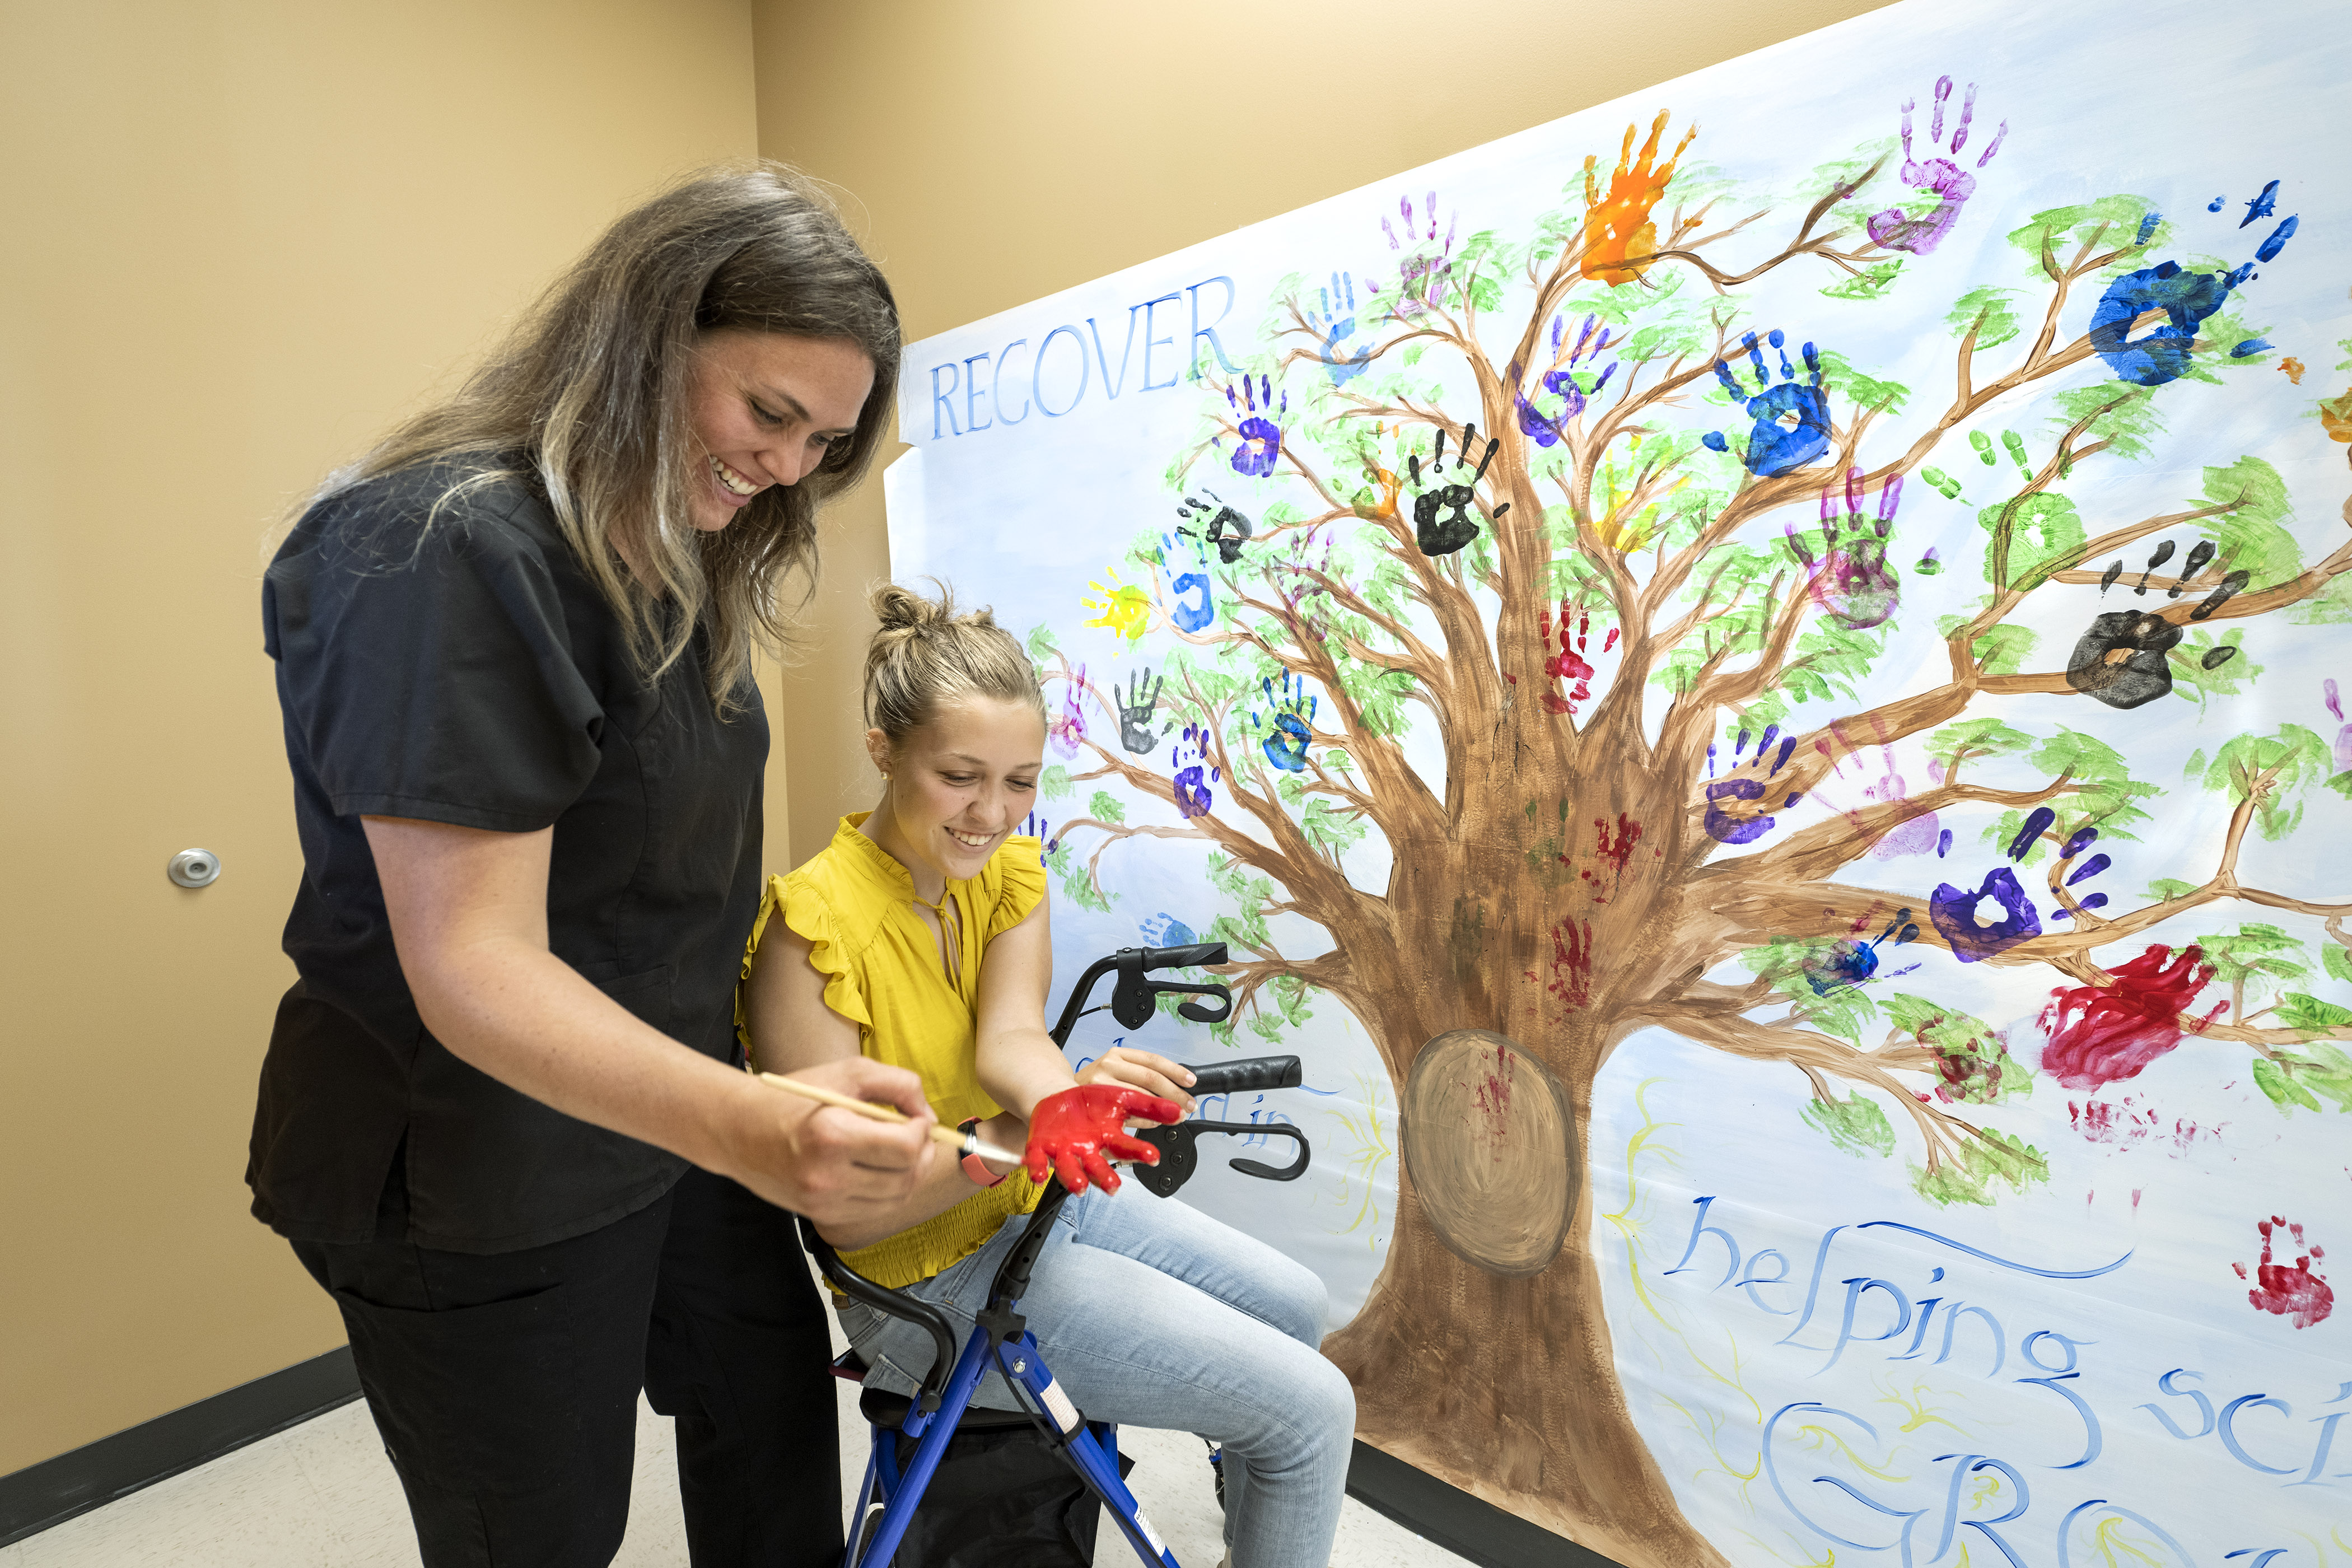 Teenage girl laughs and smiles as she puts paint on her hand. She is about to put a handprint on a wall with a tree painting and handprints as leaves. A nurse is helping her put the paint on her hand, as the girl sits on her walker.